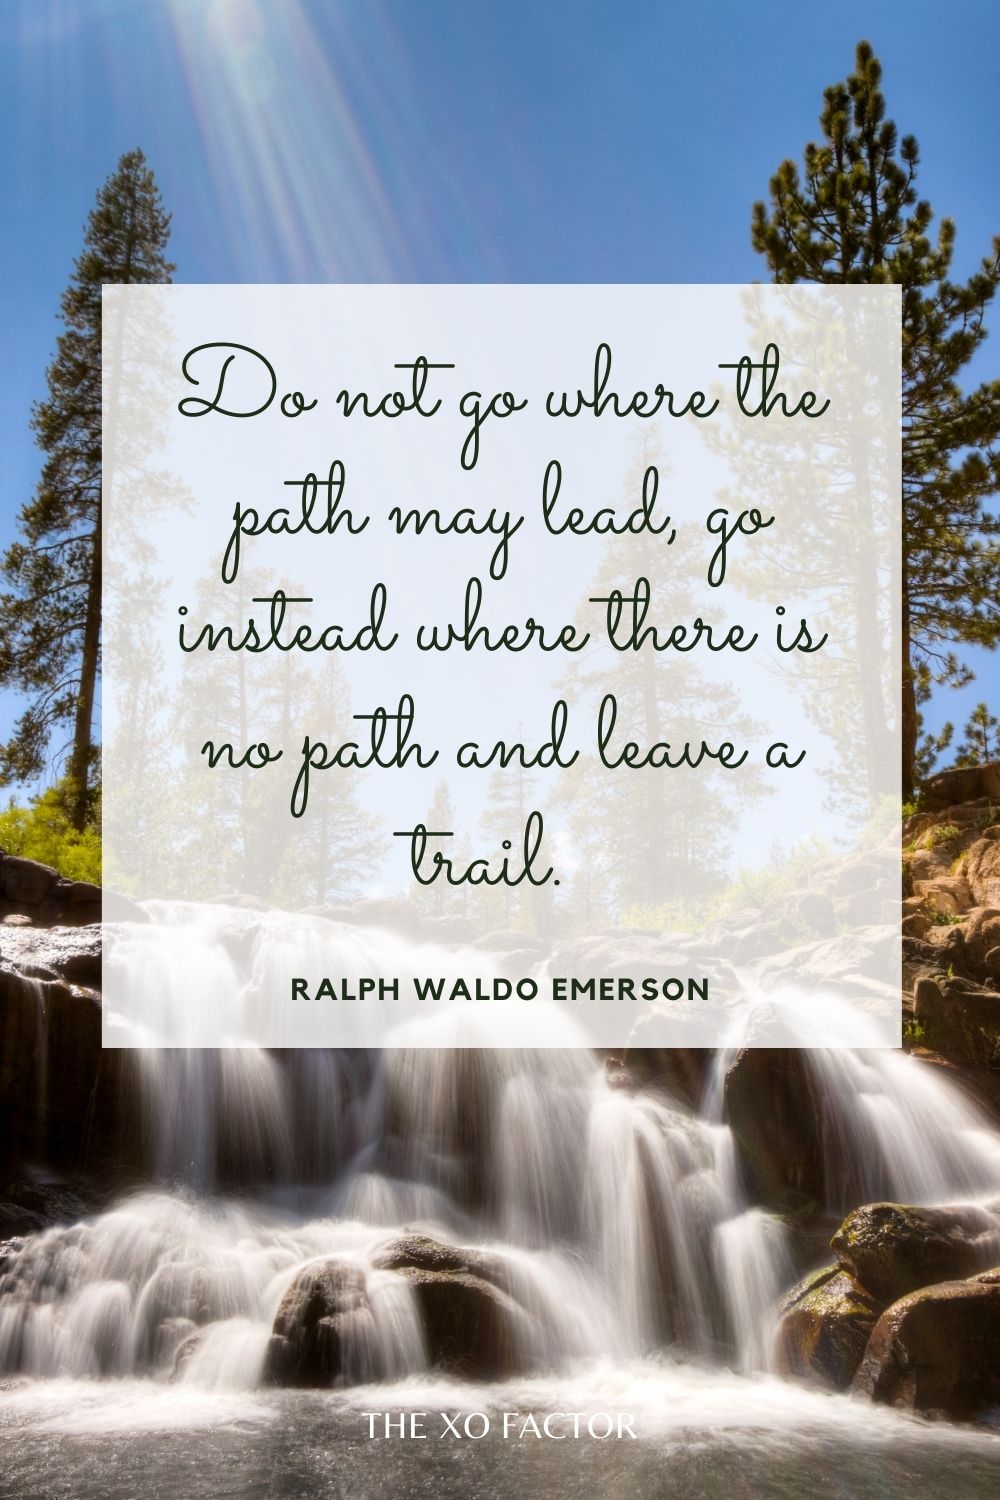 Do not go where the path may lead, go instead where there is no path and leave a trail.  Ralph Waldo Emerson